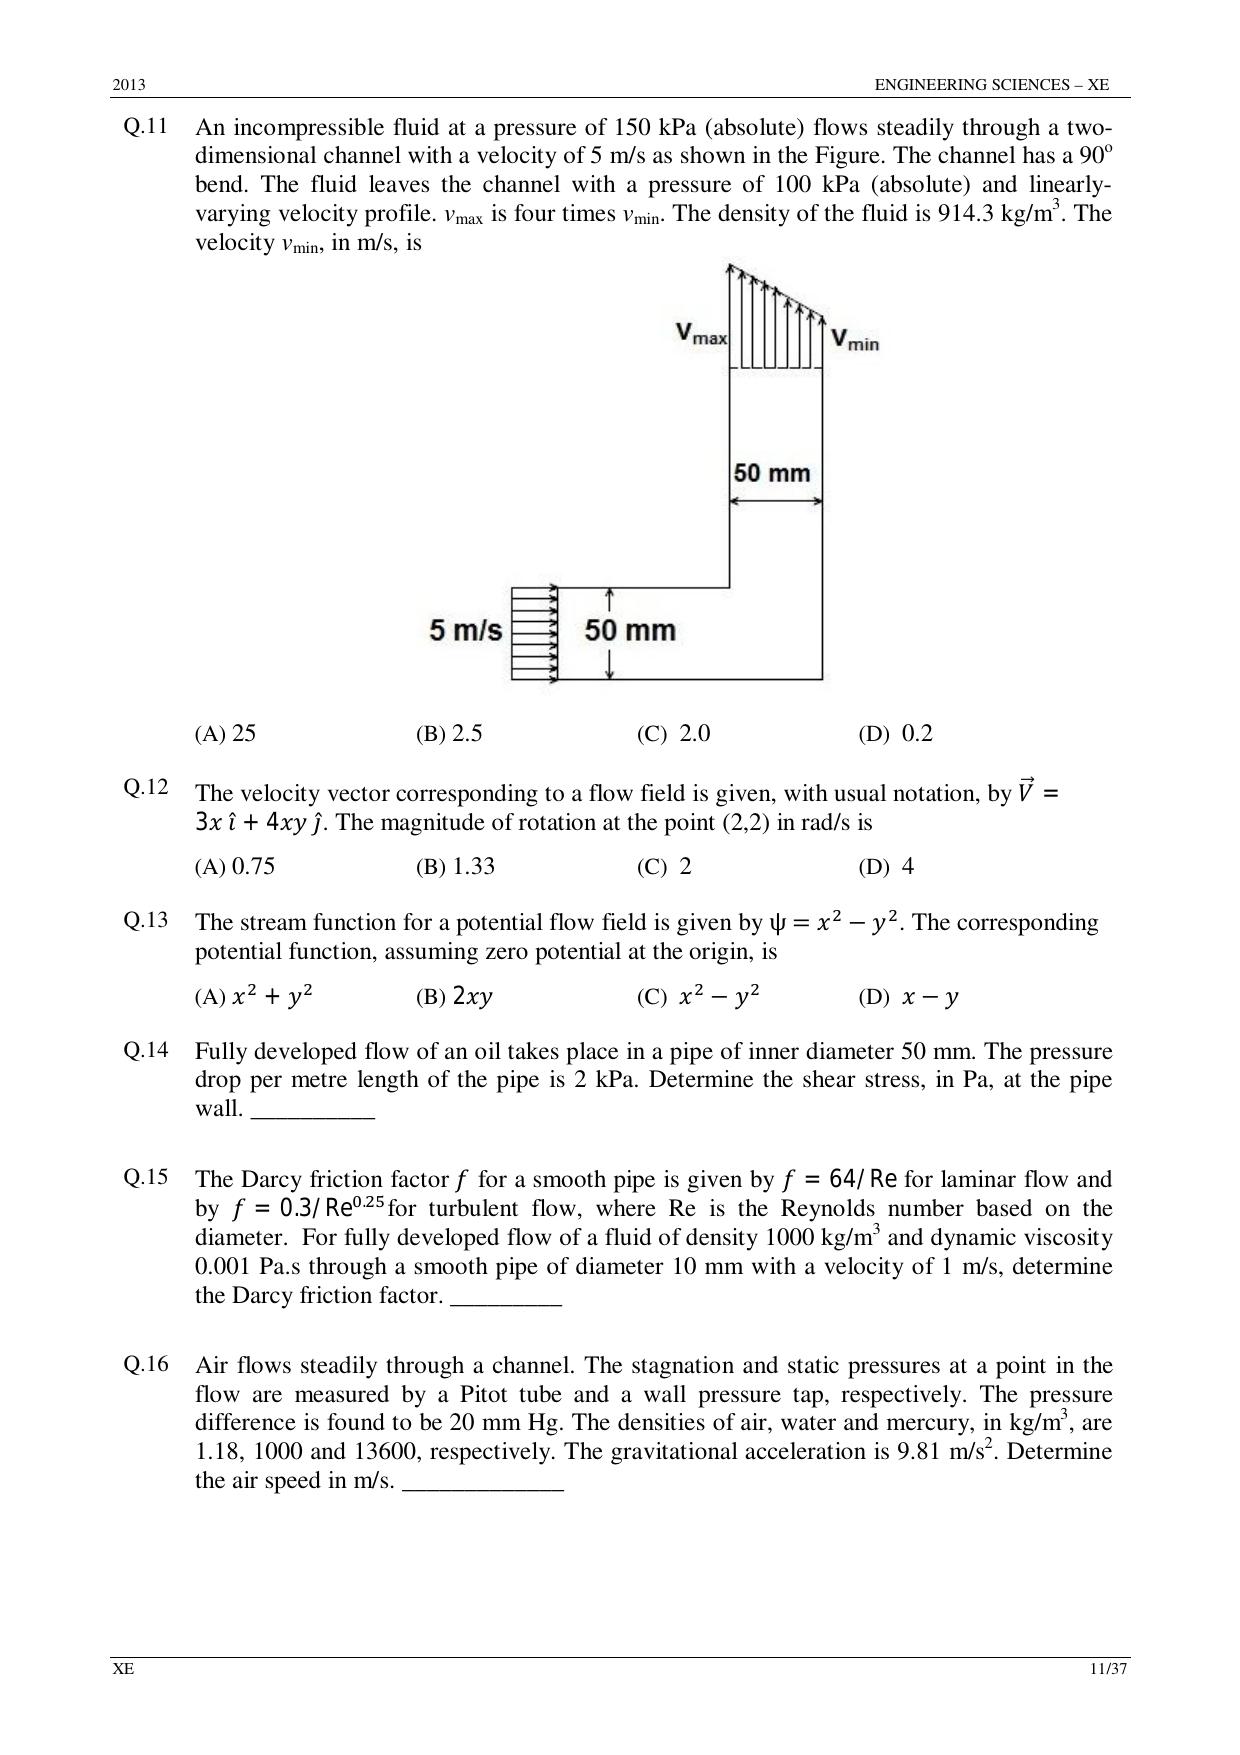 GATE 2013 Engineering Sciences (XE) Question Paper with Answer Key - Page 11